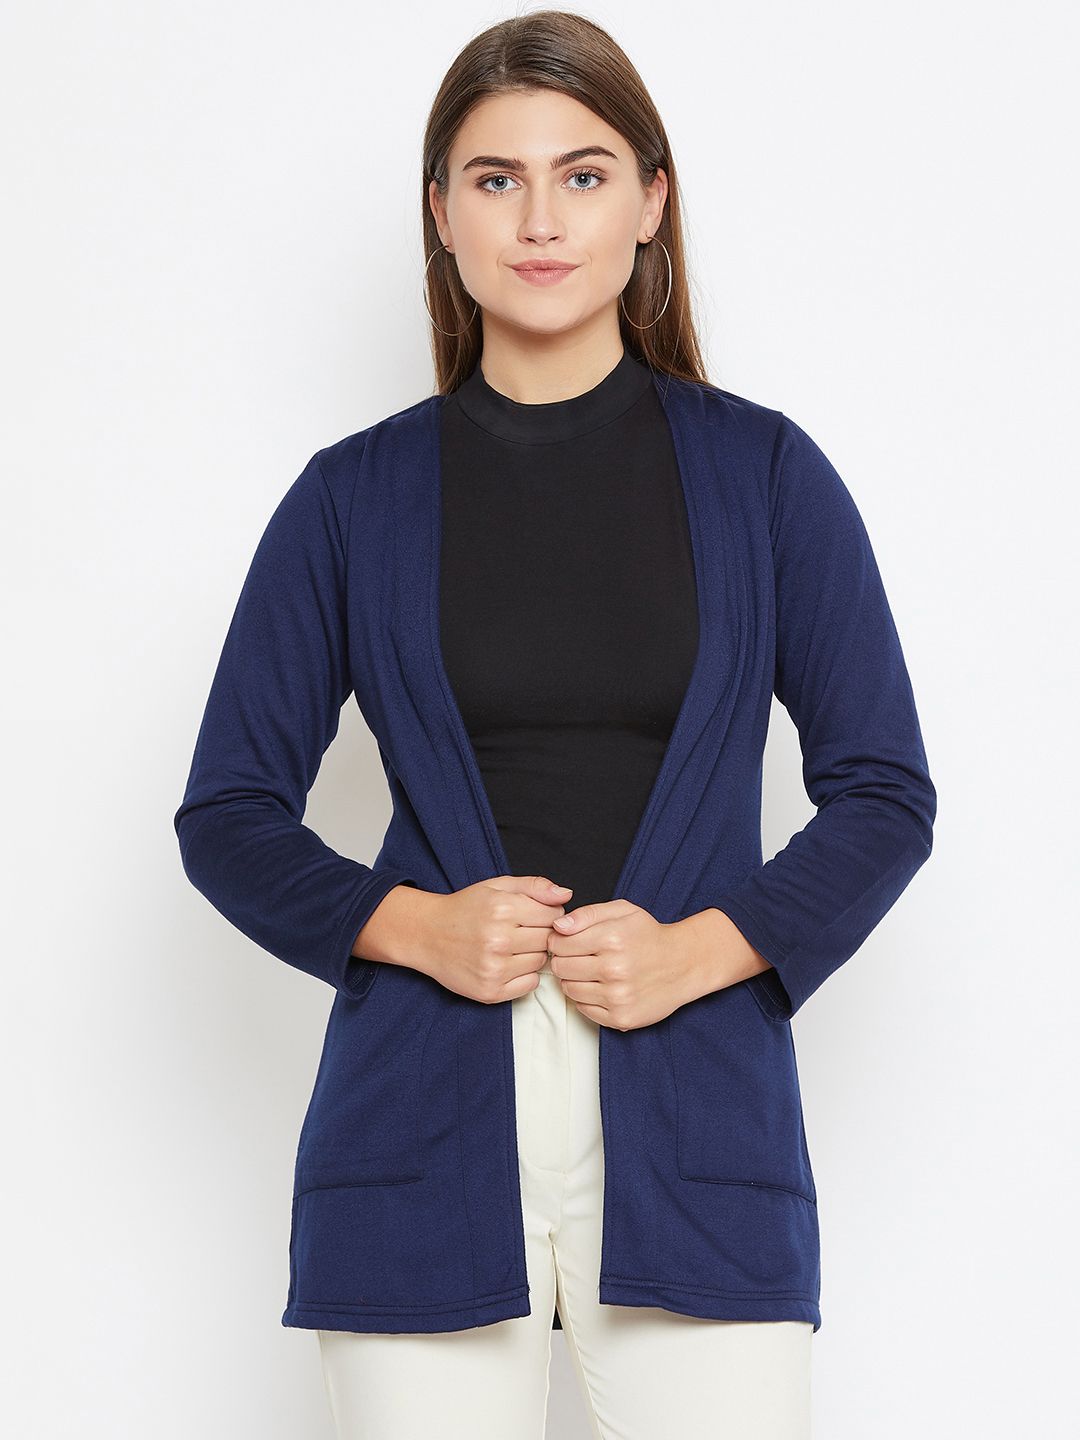 Belle Fille Women Navy Blue Solid Open Front Shrug Price in India